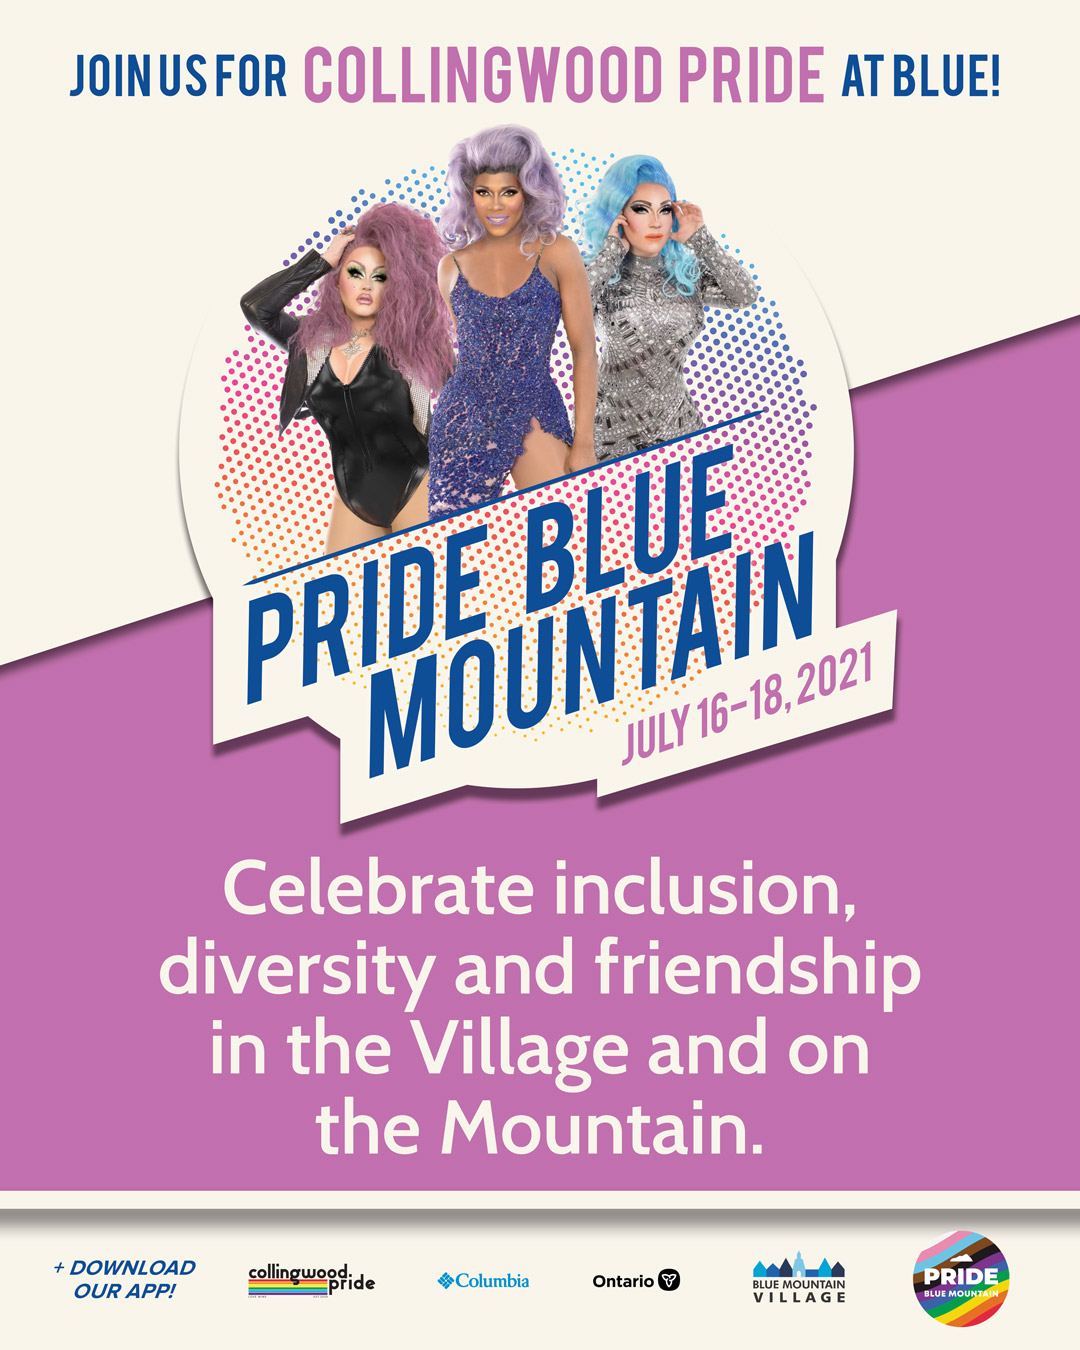 Pride Blue Mountain promotional materials designed by Light Up the Sky.